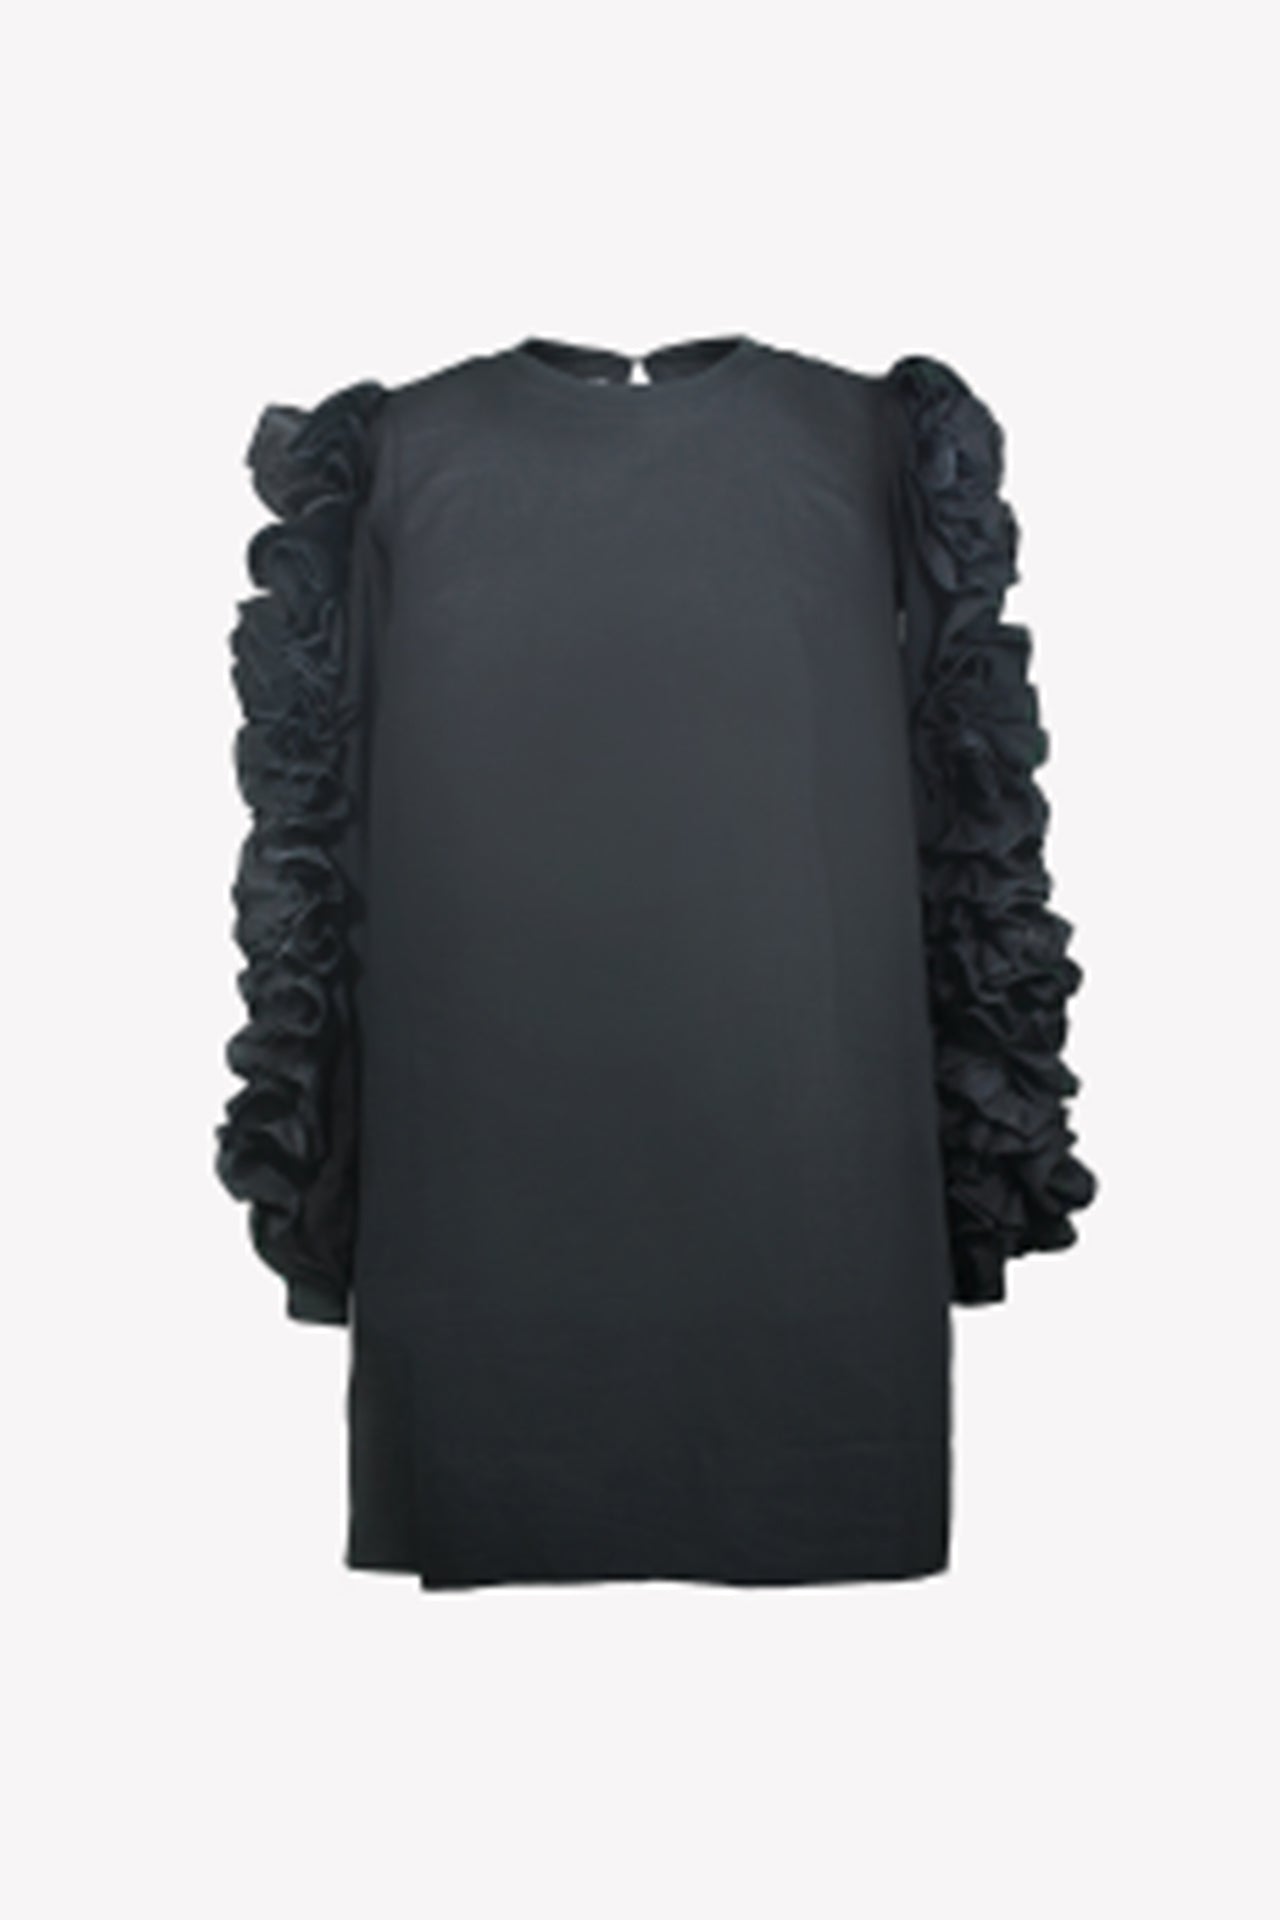 Shift dress with ruffles on sleeves